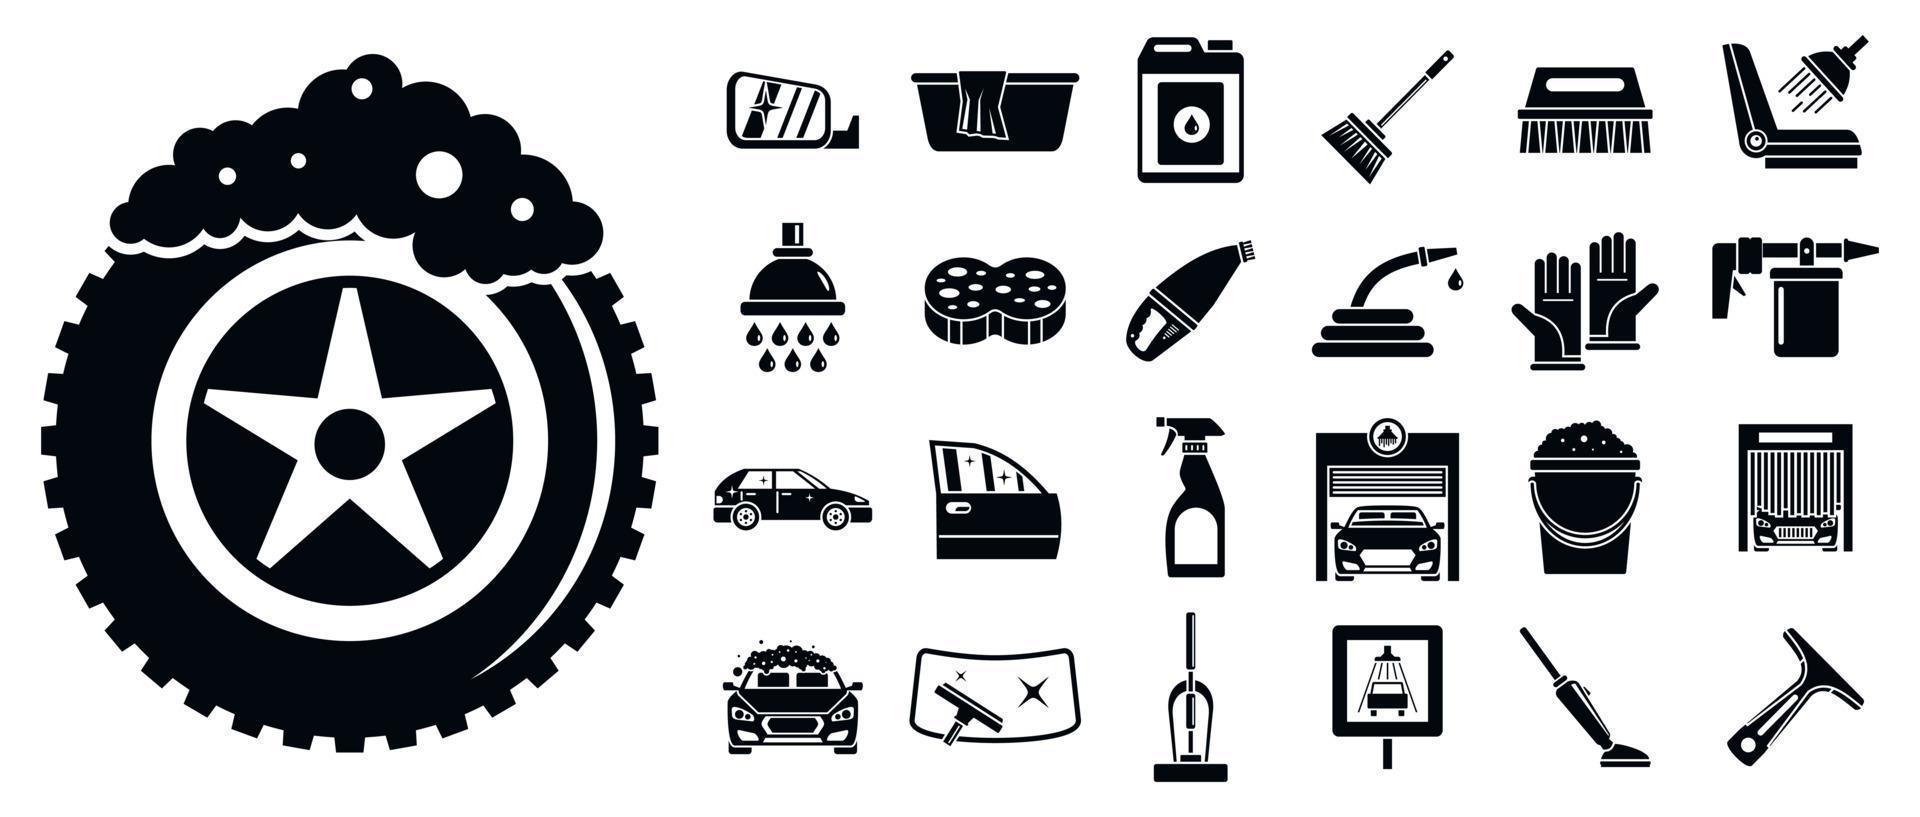 Cleaning car wash icon set, simple style vector